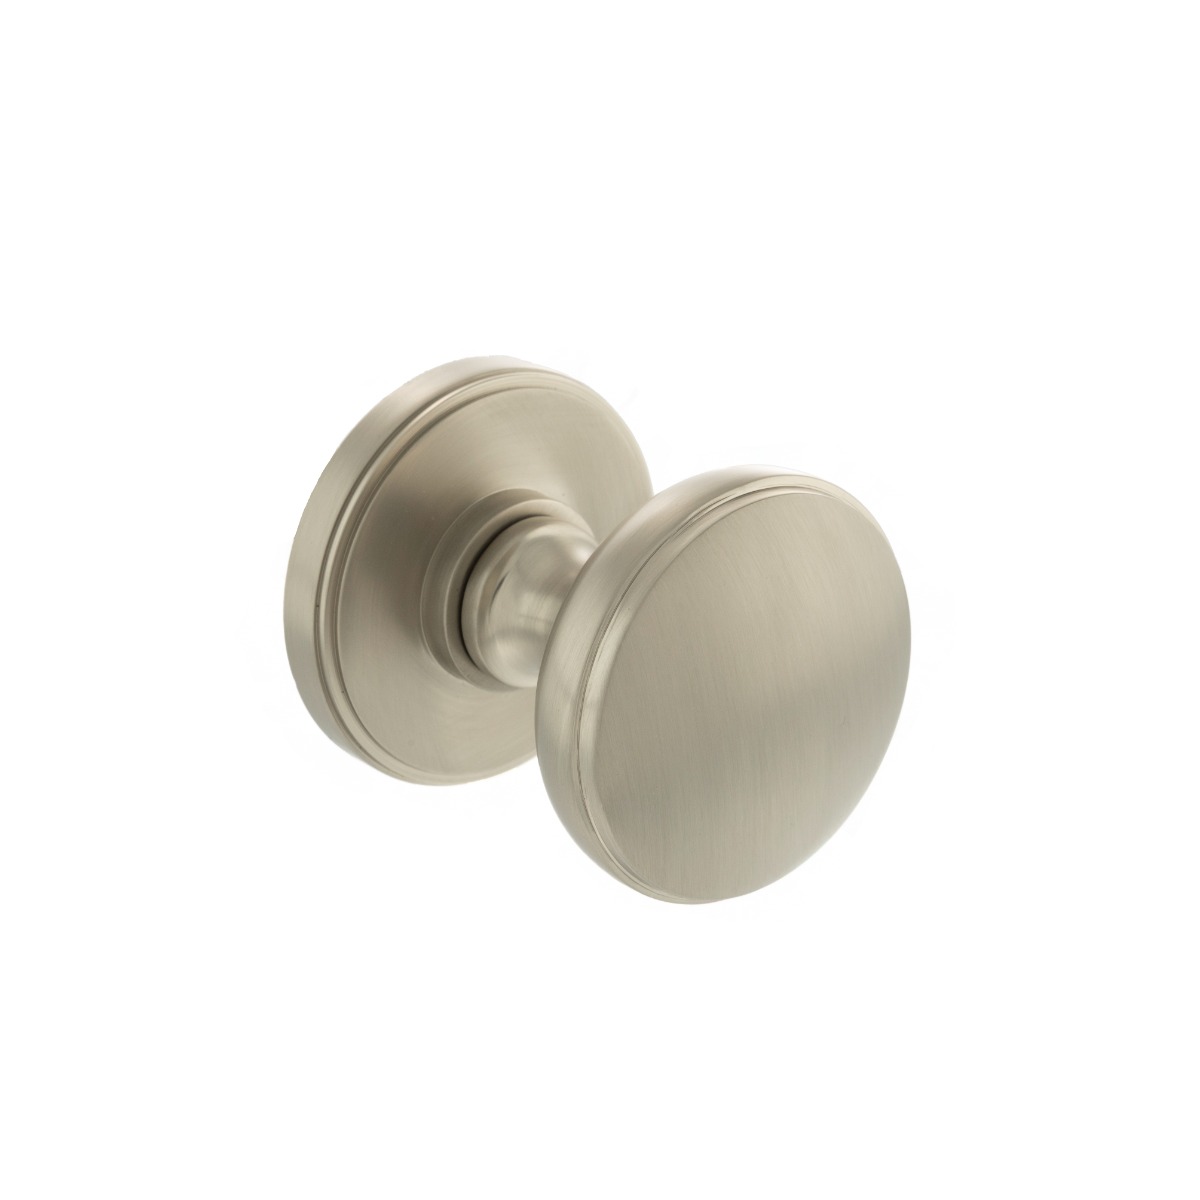 Millhouse Brass Edison Solid Brass Domed Mortice Knob on Concealed Fix Rose - Satin Nickel MH400DMKSN